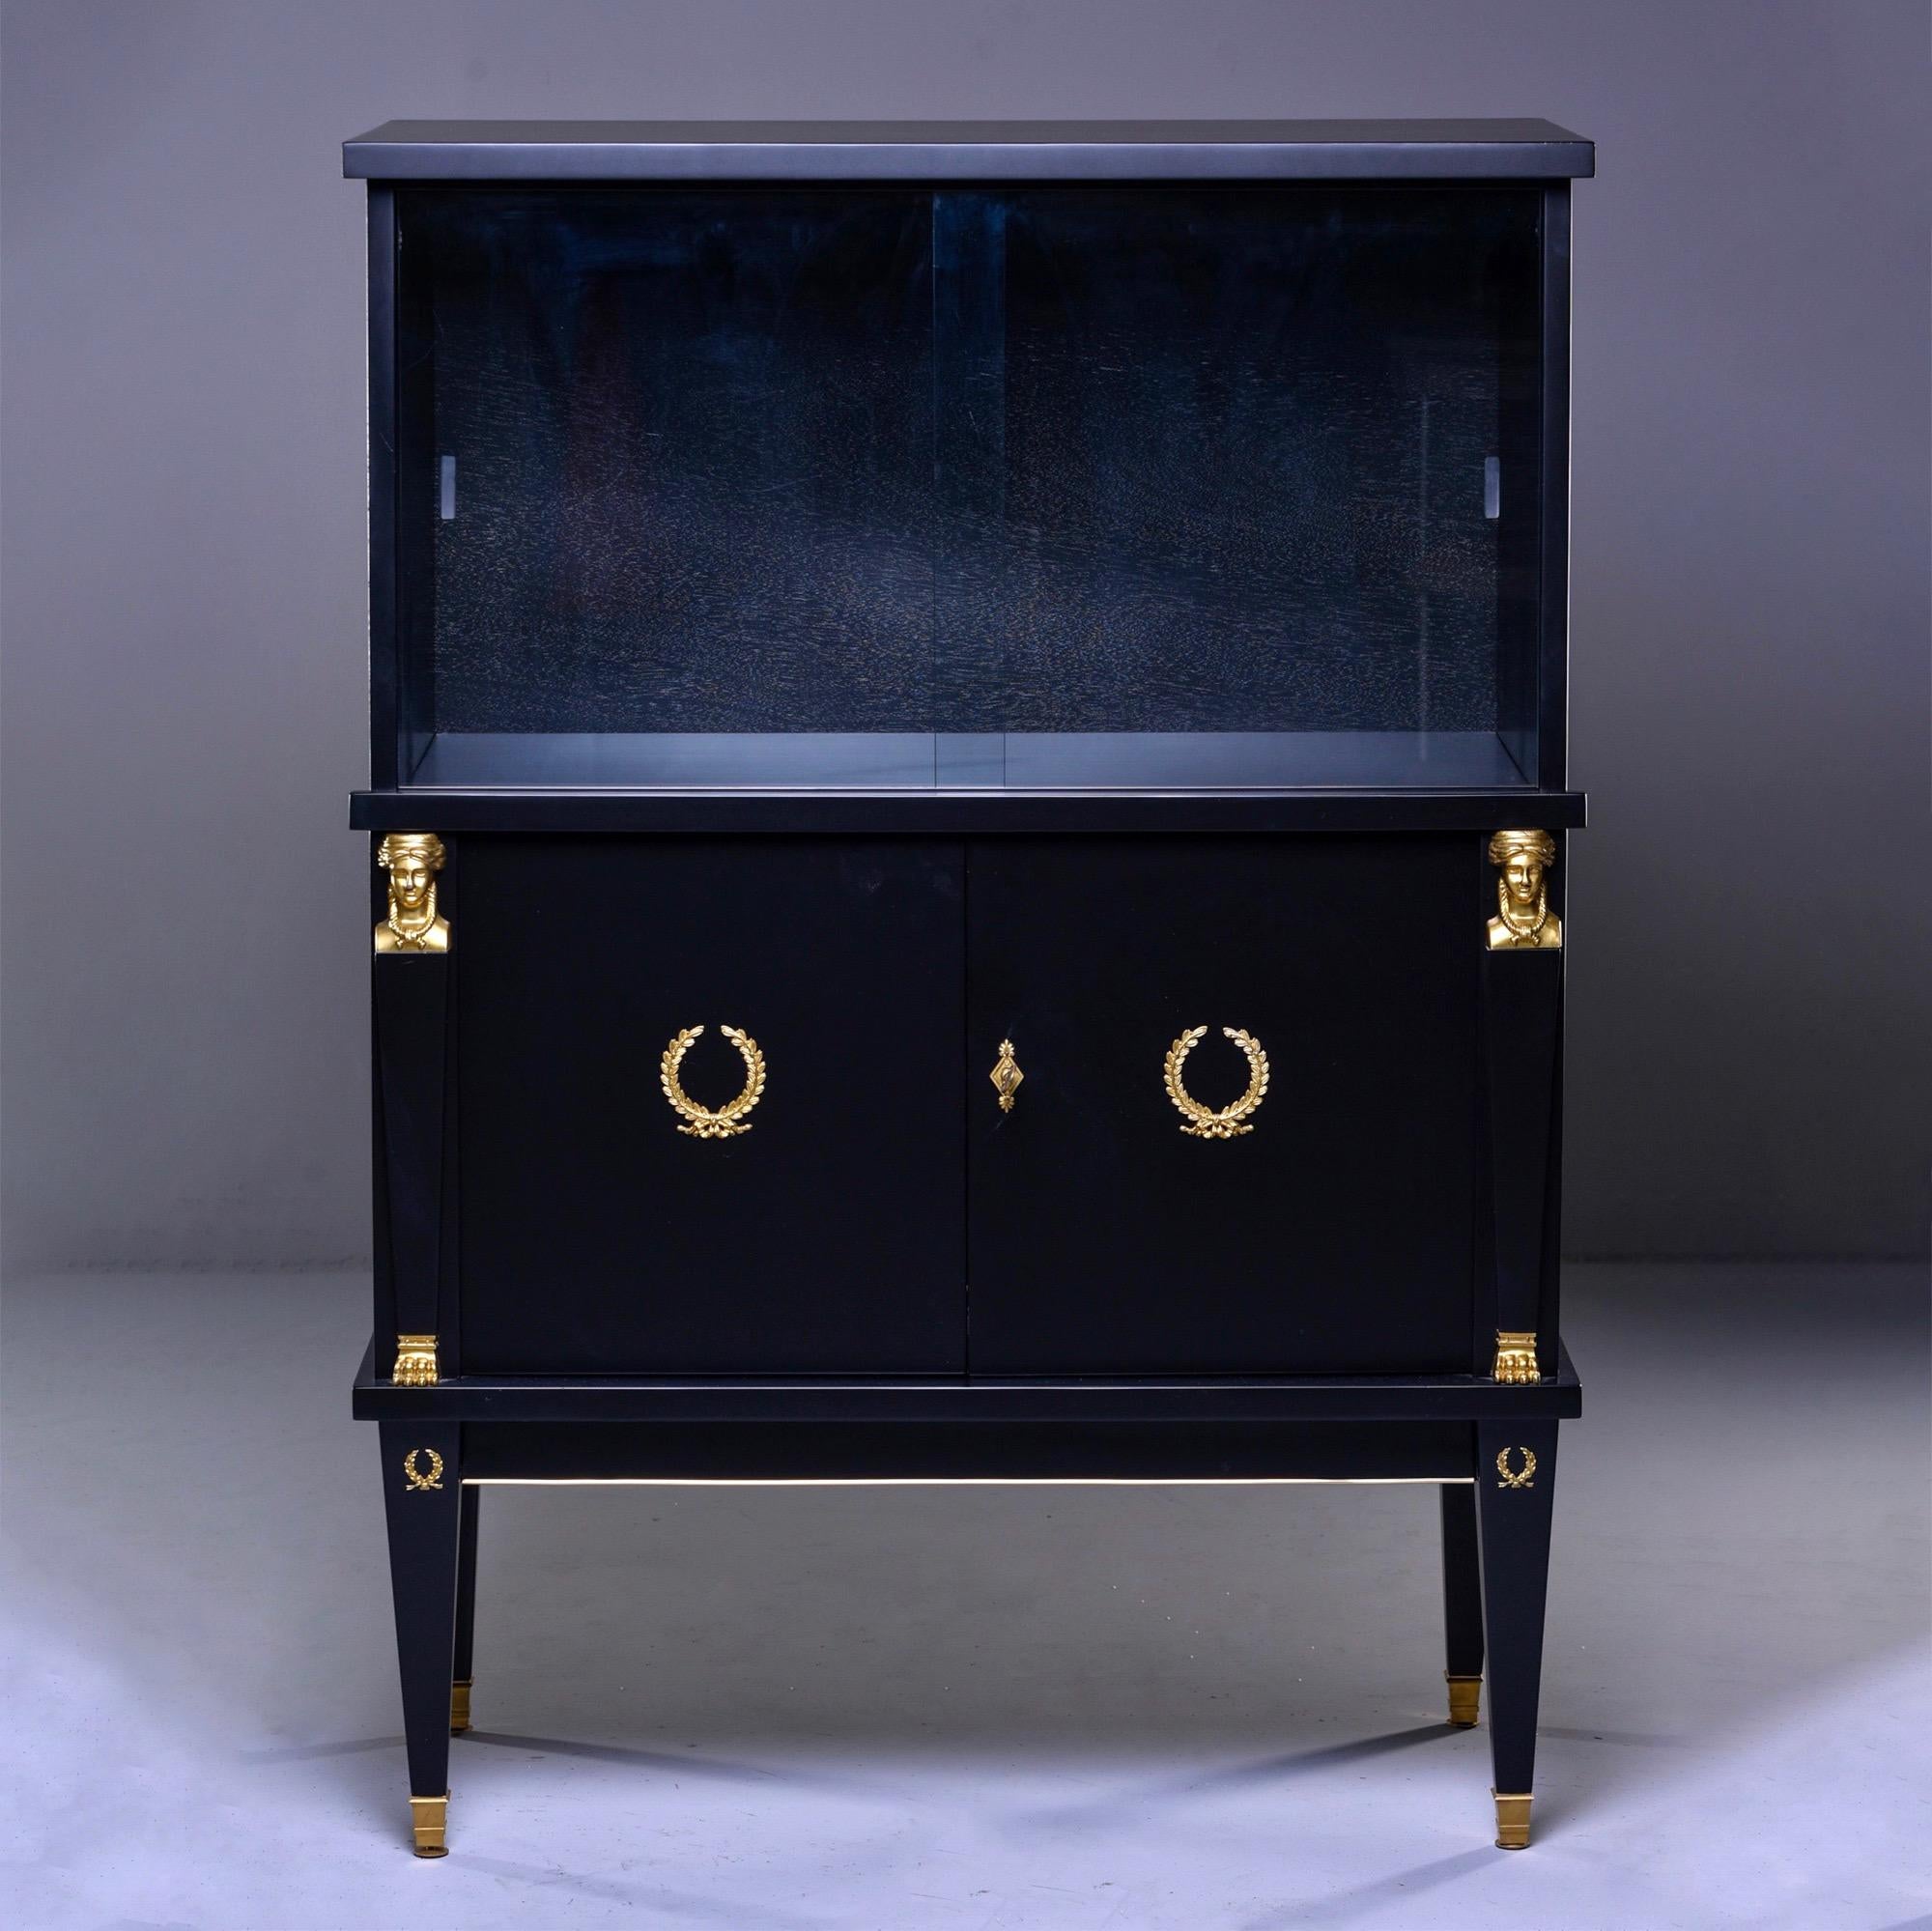 Early 20th Century French Vitrine or Dry Bar with Ebonized Finish and Brass Trim For Sale 8